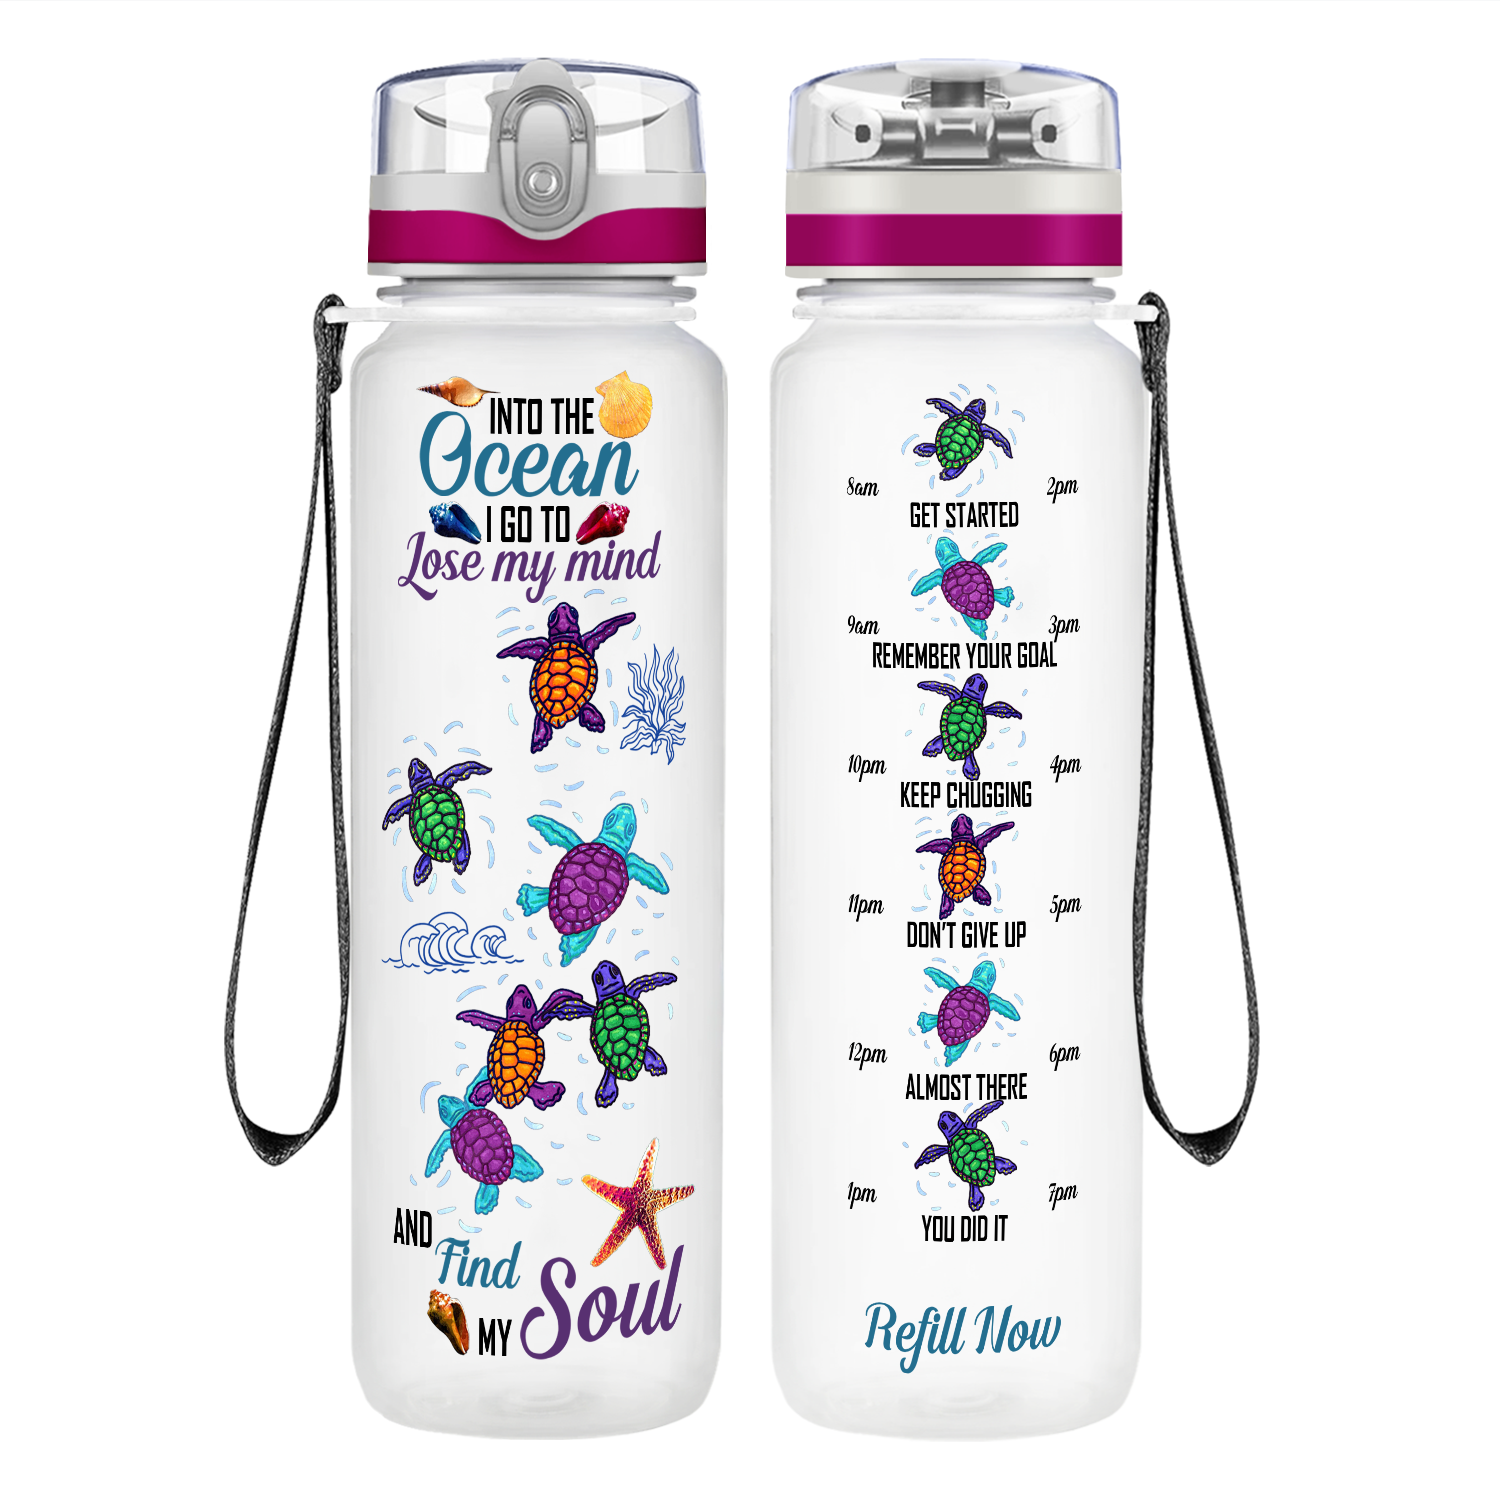 Turtles Into The Ocean I Go To Lose My Mind on 32 oz Motivational Tracking Water Bottle